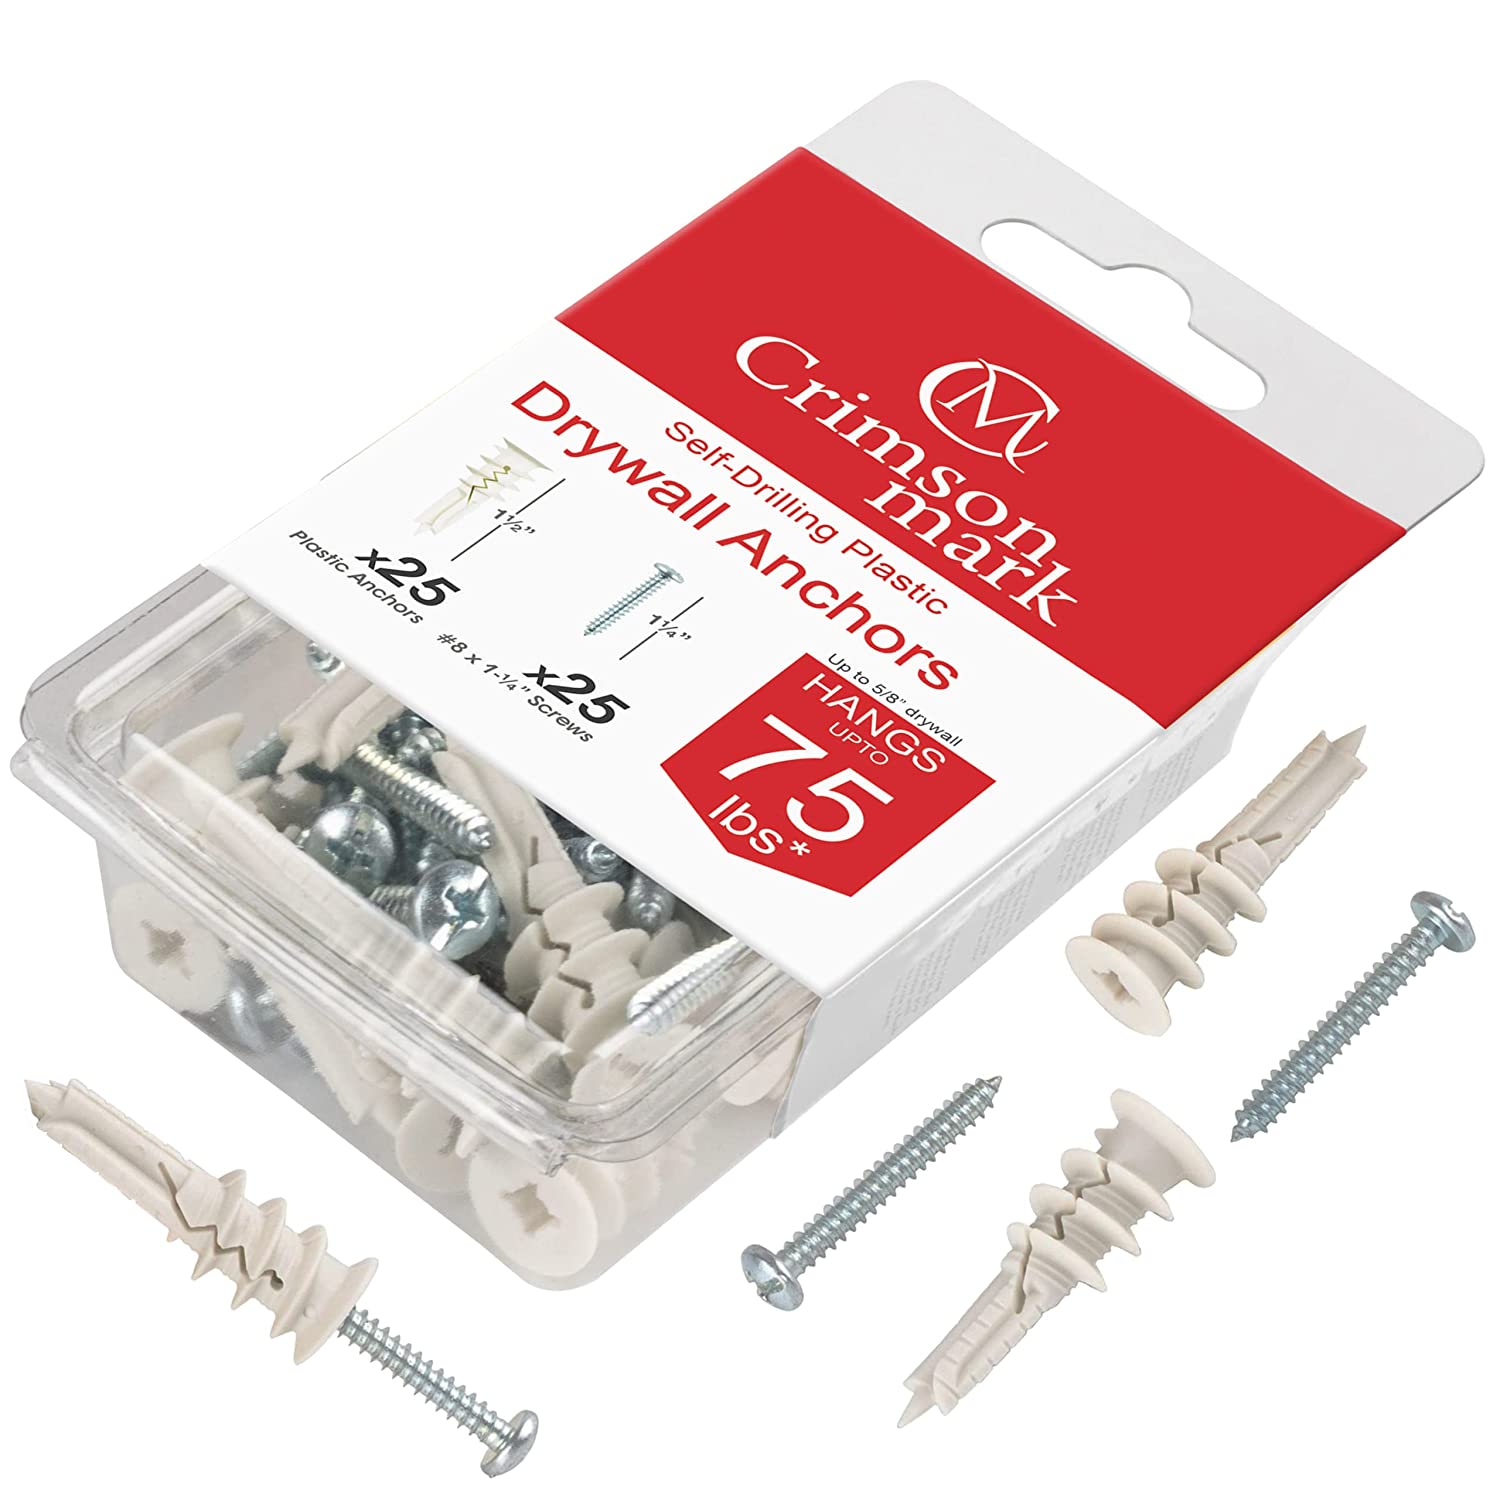 Amazon how to use drywall anchors set of drywall anchors